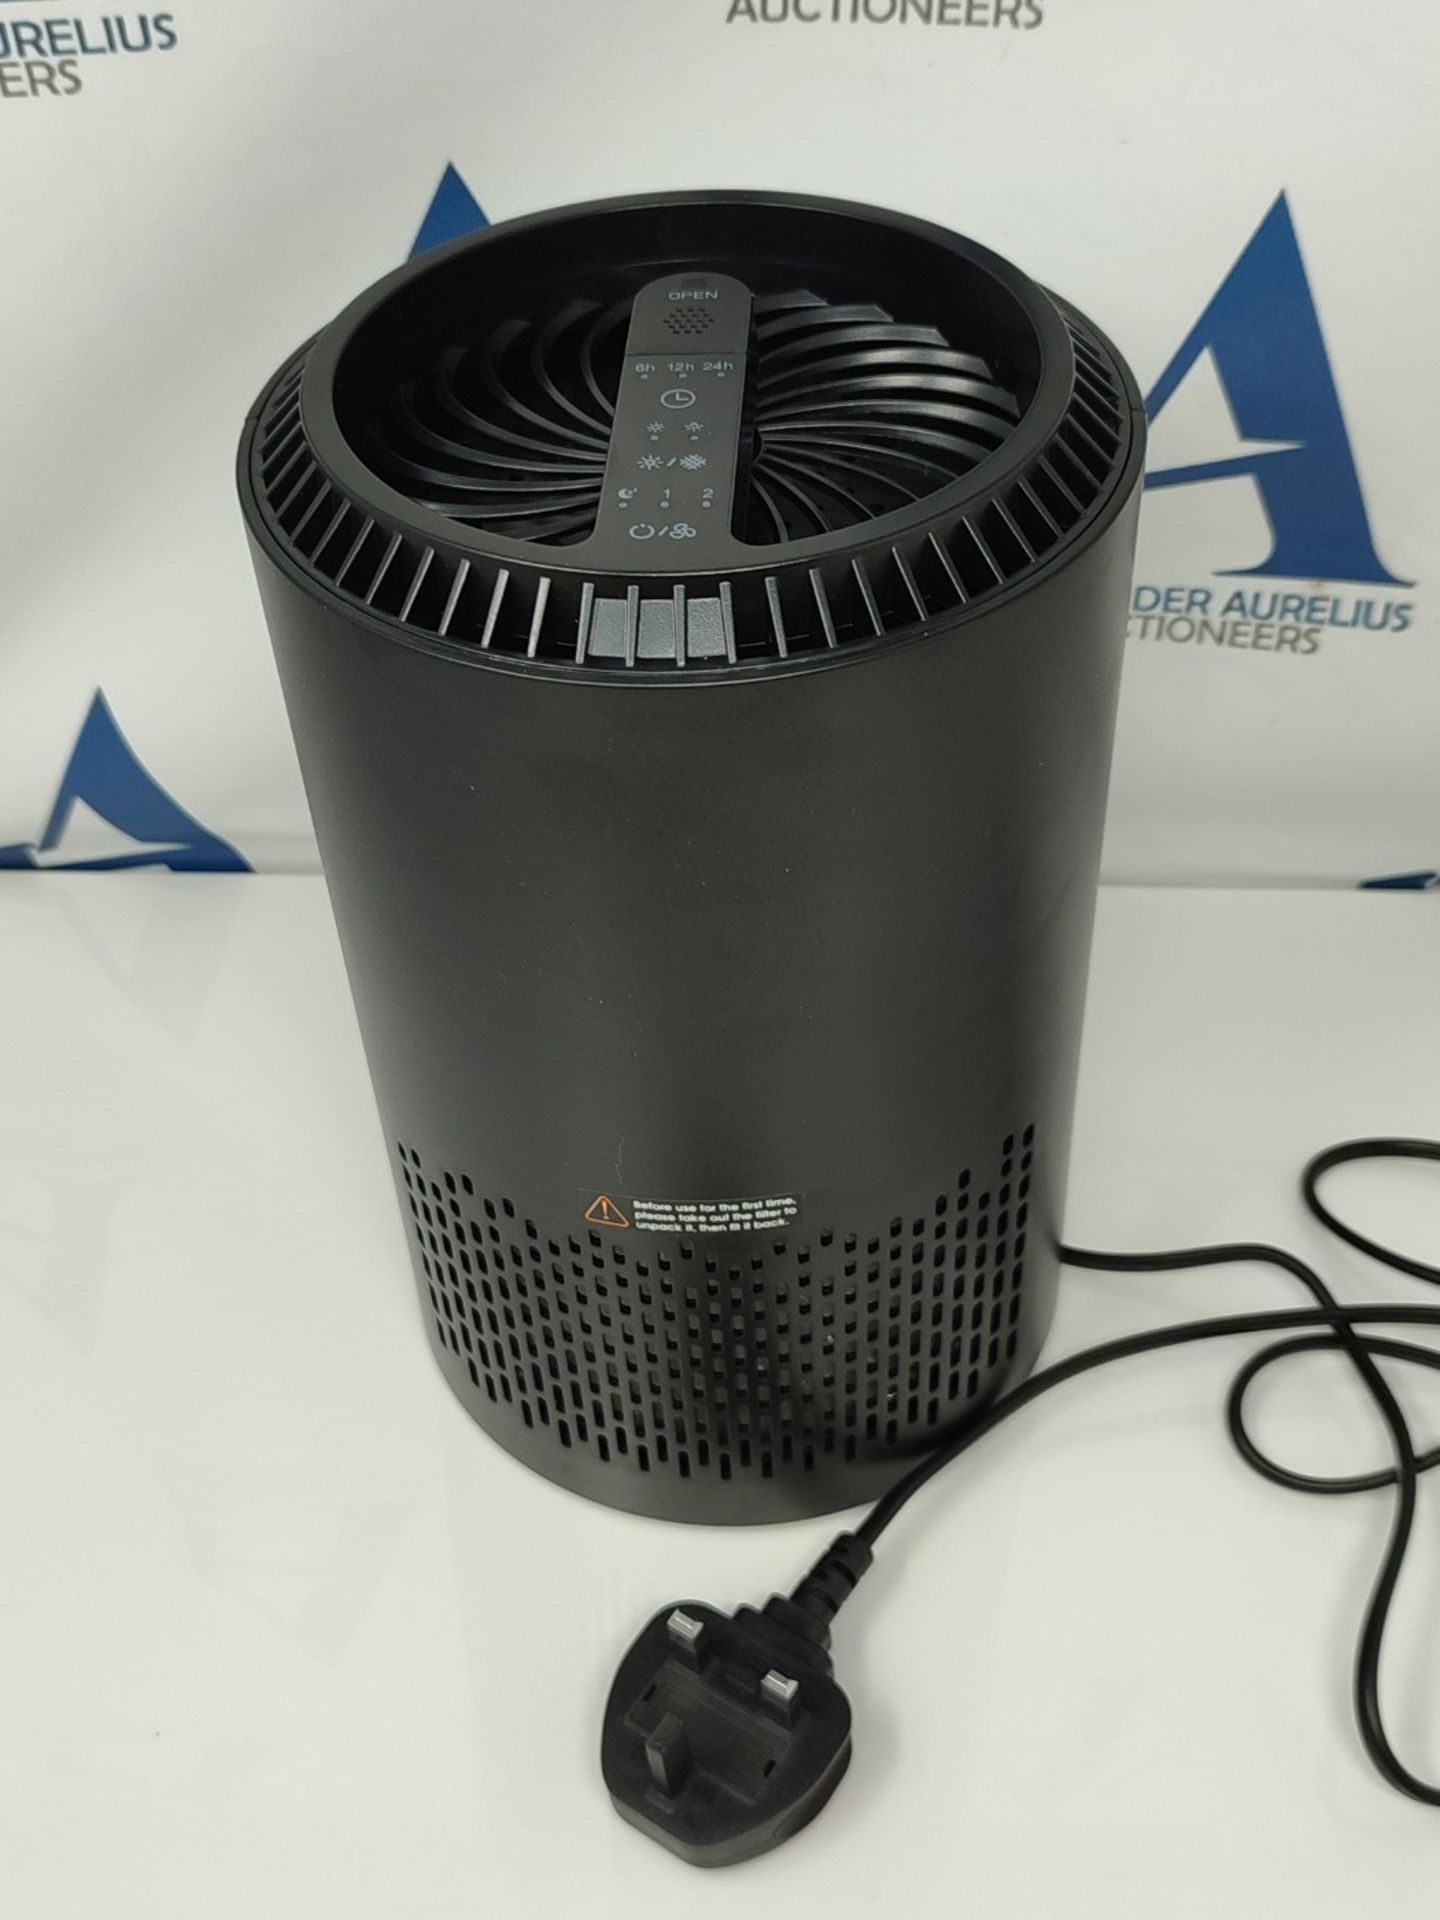 CONOPU Air Purifier for Home Bedroom with Hepa H13 99.97% Filter, Black, Air Cleaner p - Image 2 of 3